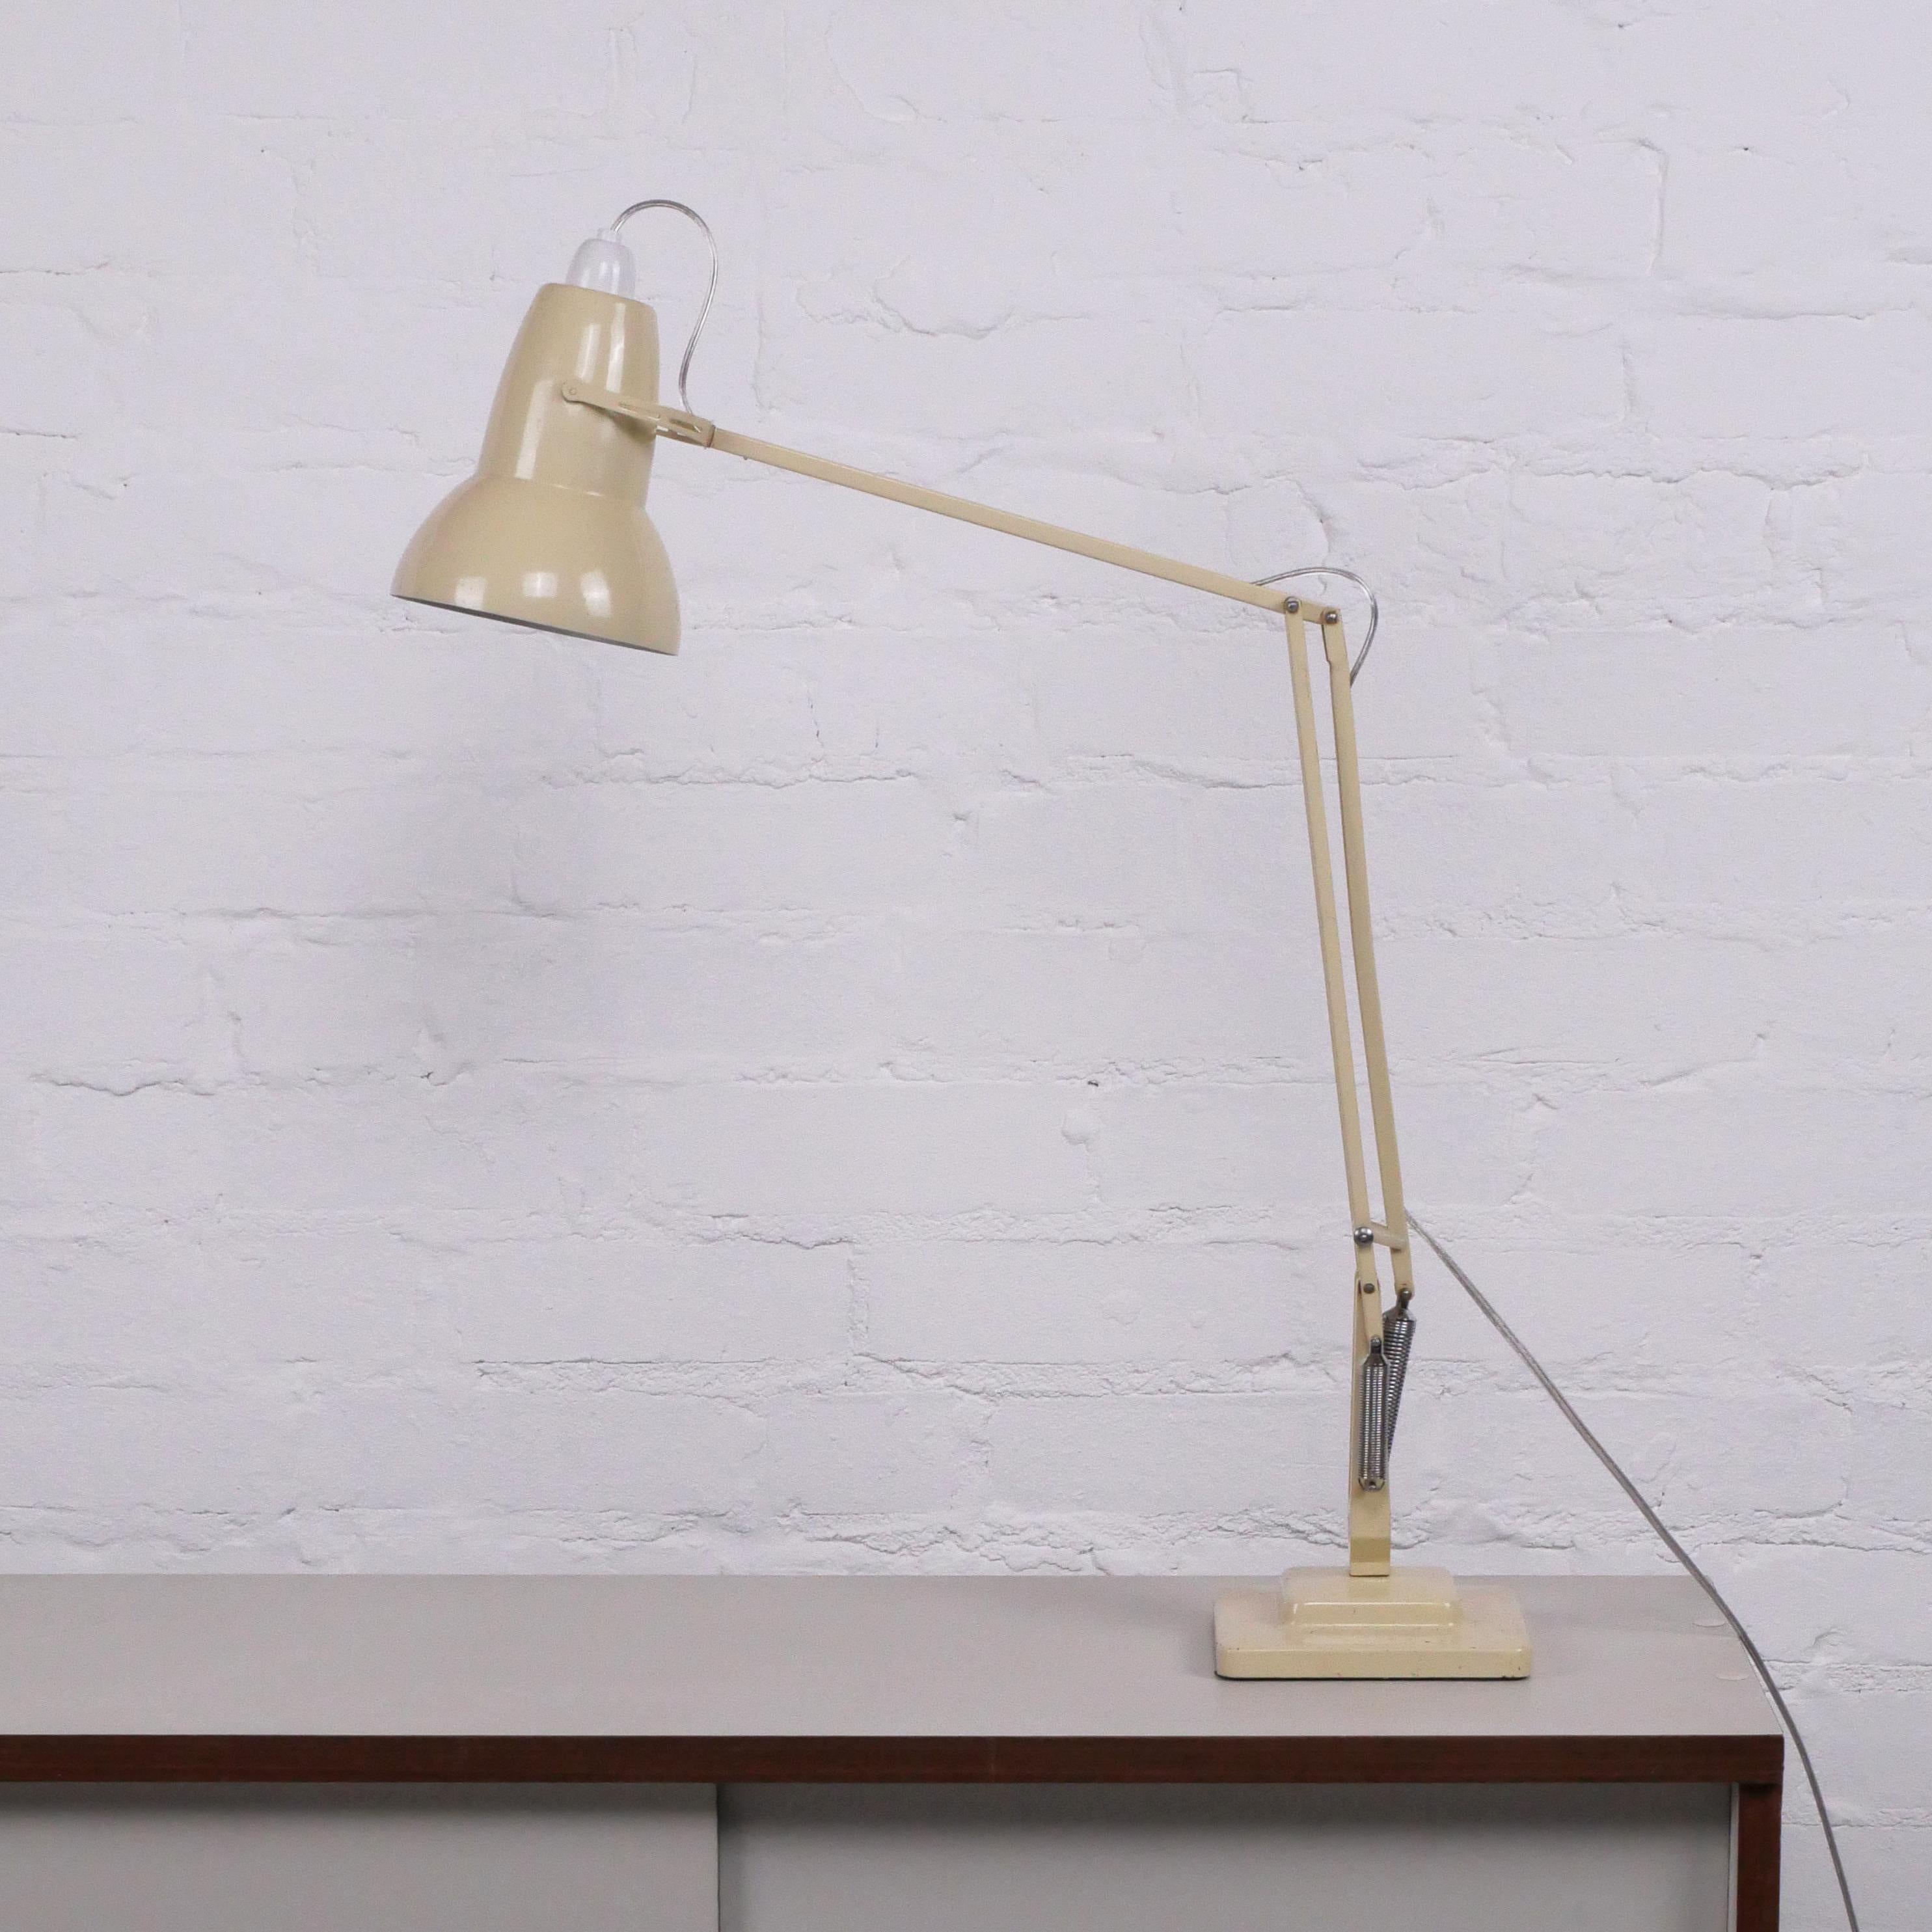 Metal Anglepoise lamp model 1227, mid-century, original, rewired and fully functioning